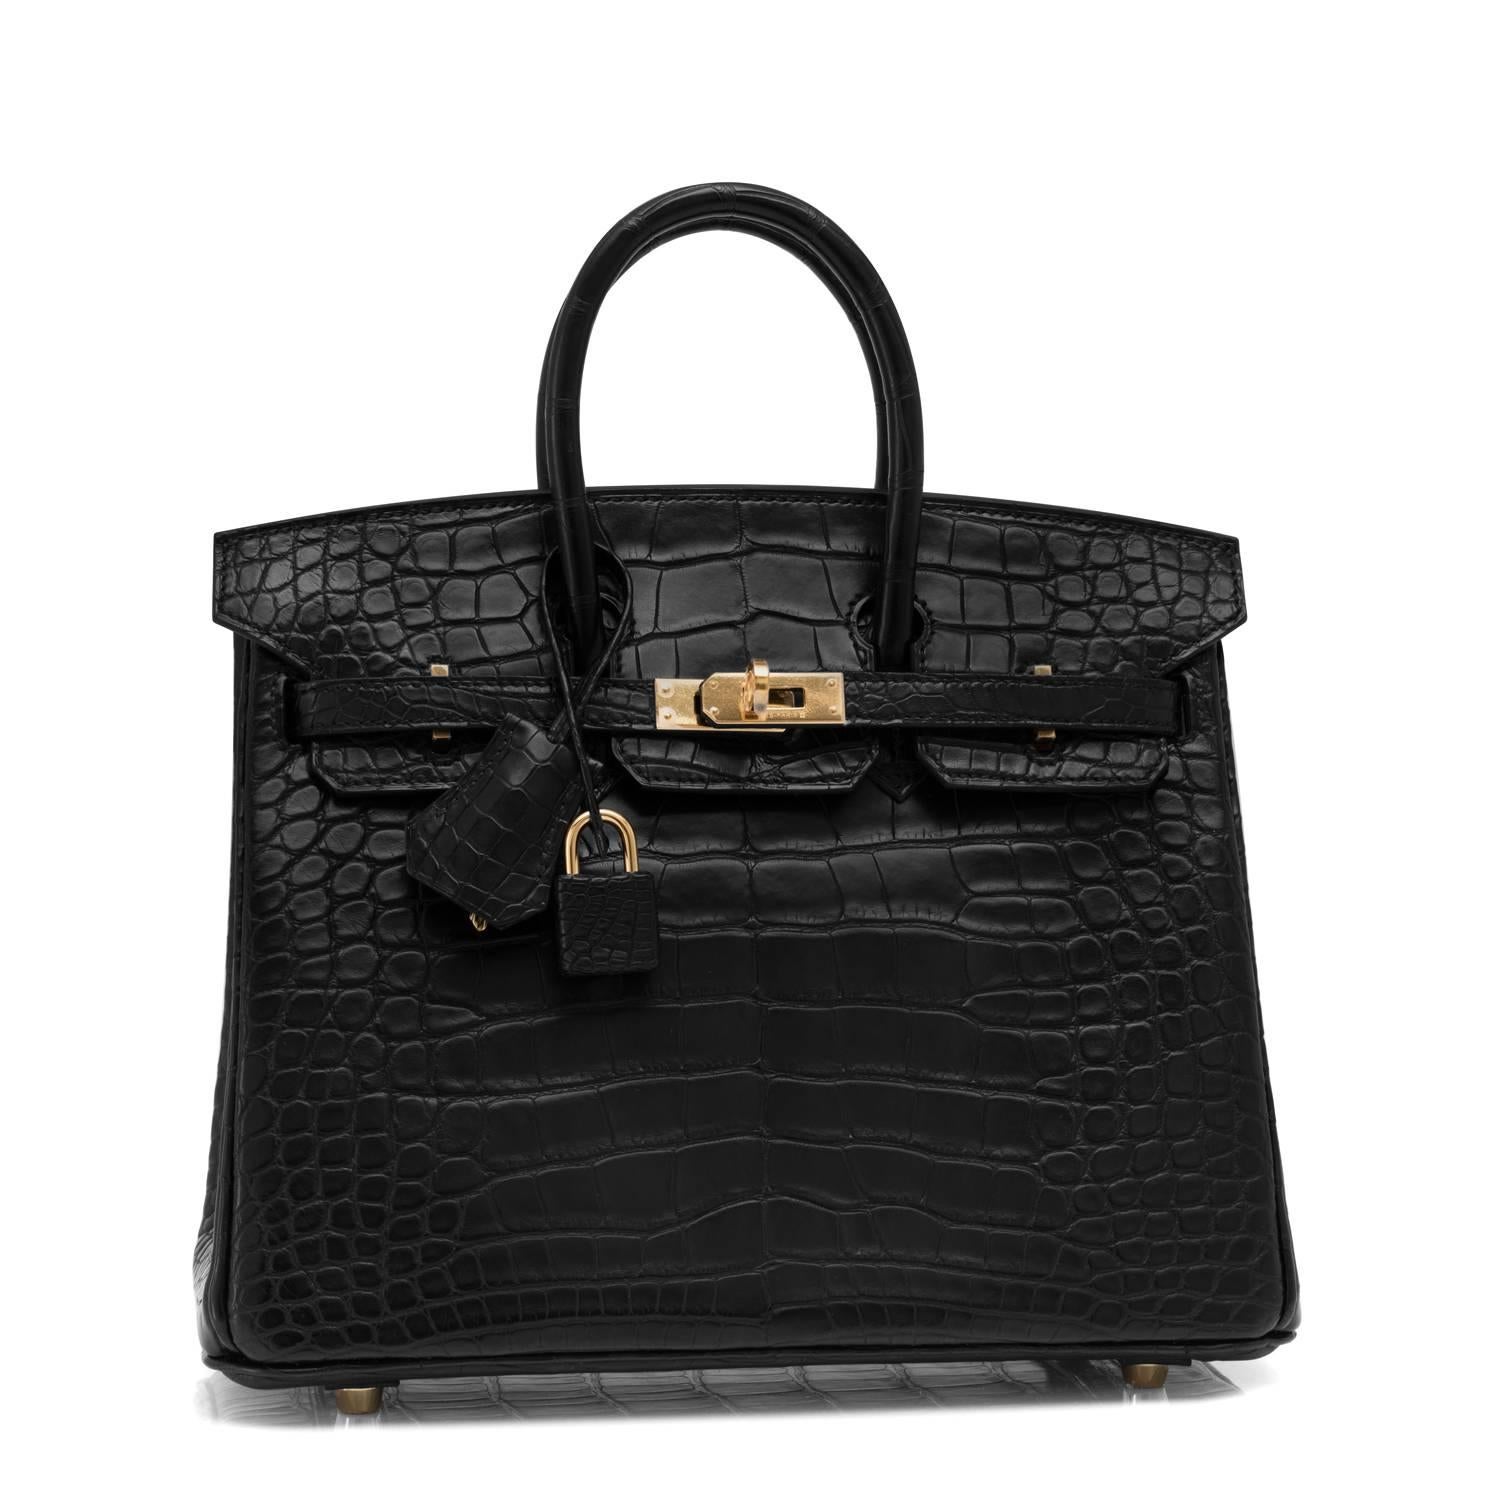 Fashionista Hermes Black Matte Alligator Baby Birkin 25cm Gold Hardware 
Brand New in Box.  Store Fresh. Pristine Condition (with plastic on hardware)
Just purchased from Hermes store; bag bears new interior X stamp.
Perfect gift! Comes full set